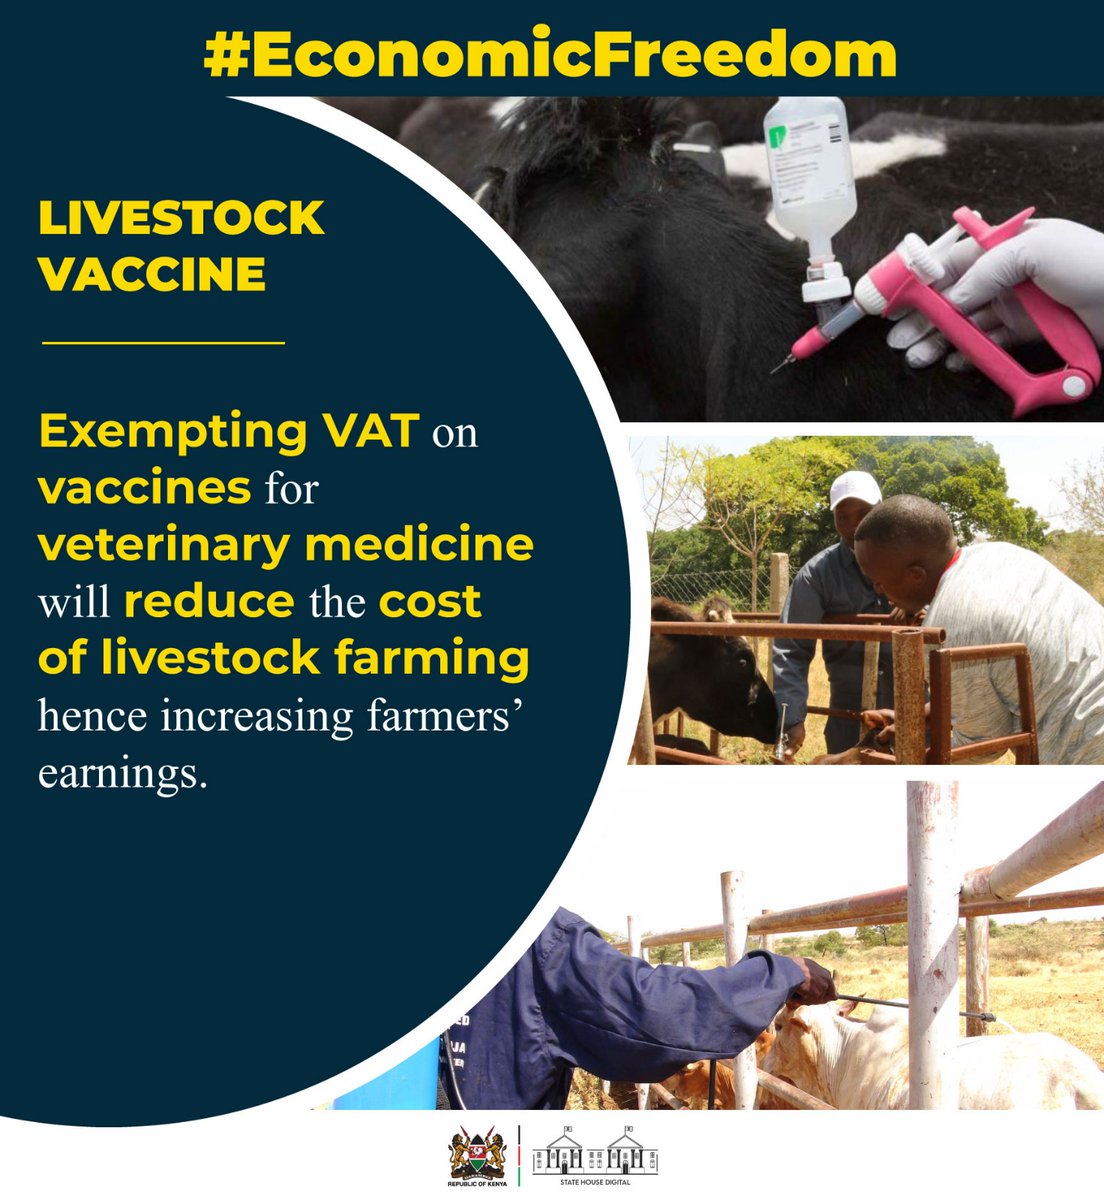 Exemptions VAT on vaccines for veterinary medicine will reduce the cost of livestock farming hence increasing farmers earnings

#EconomicFreedom